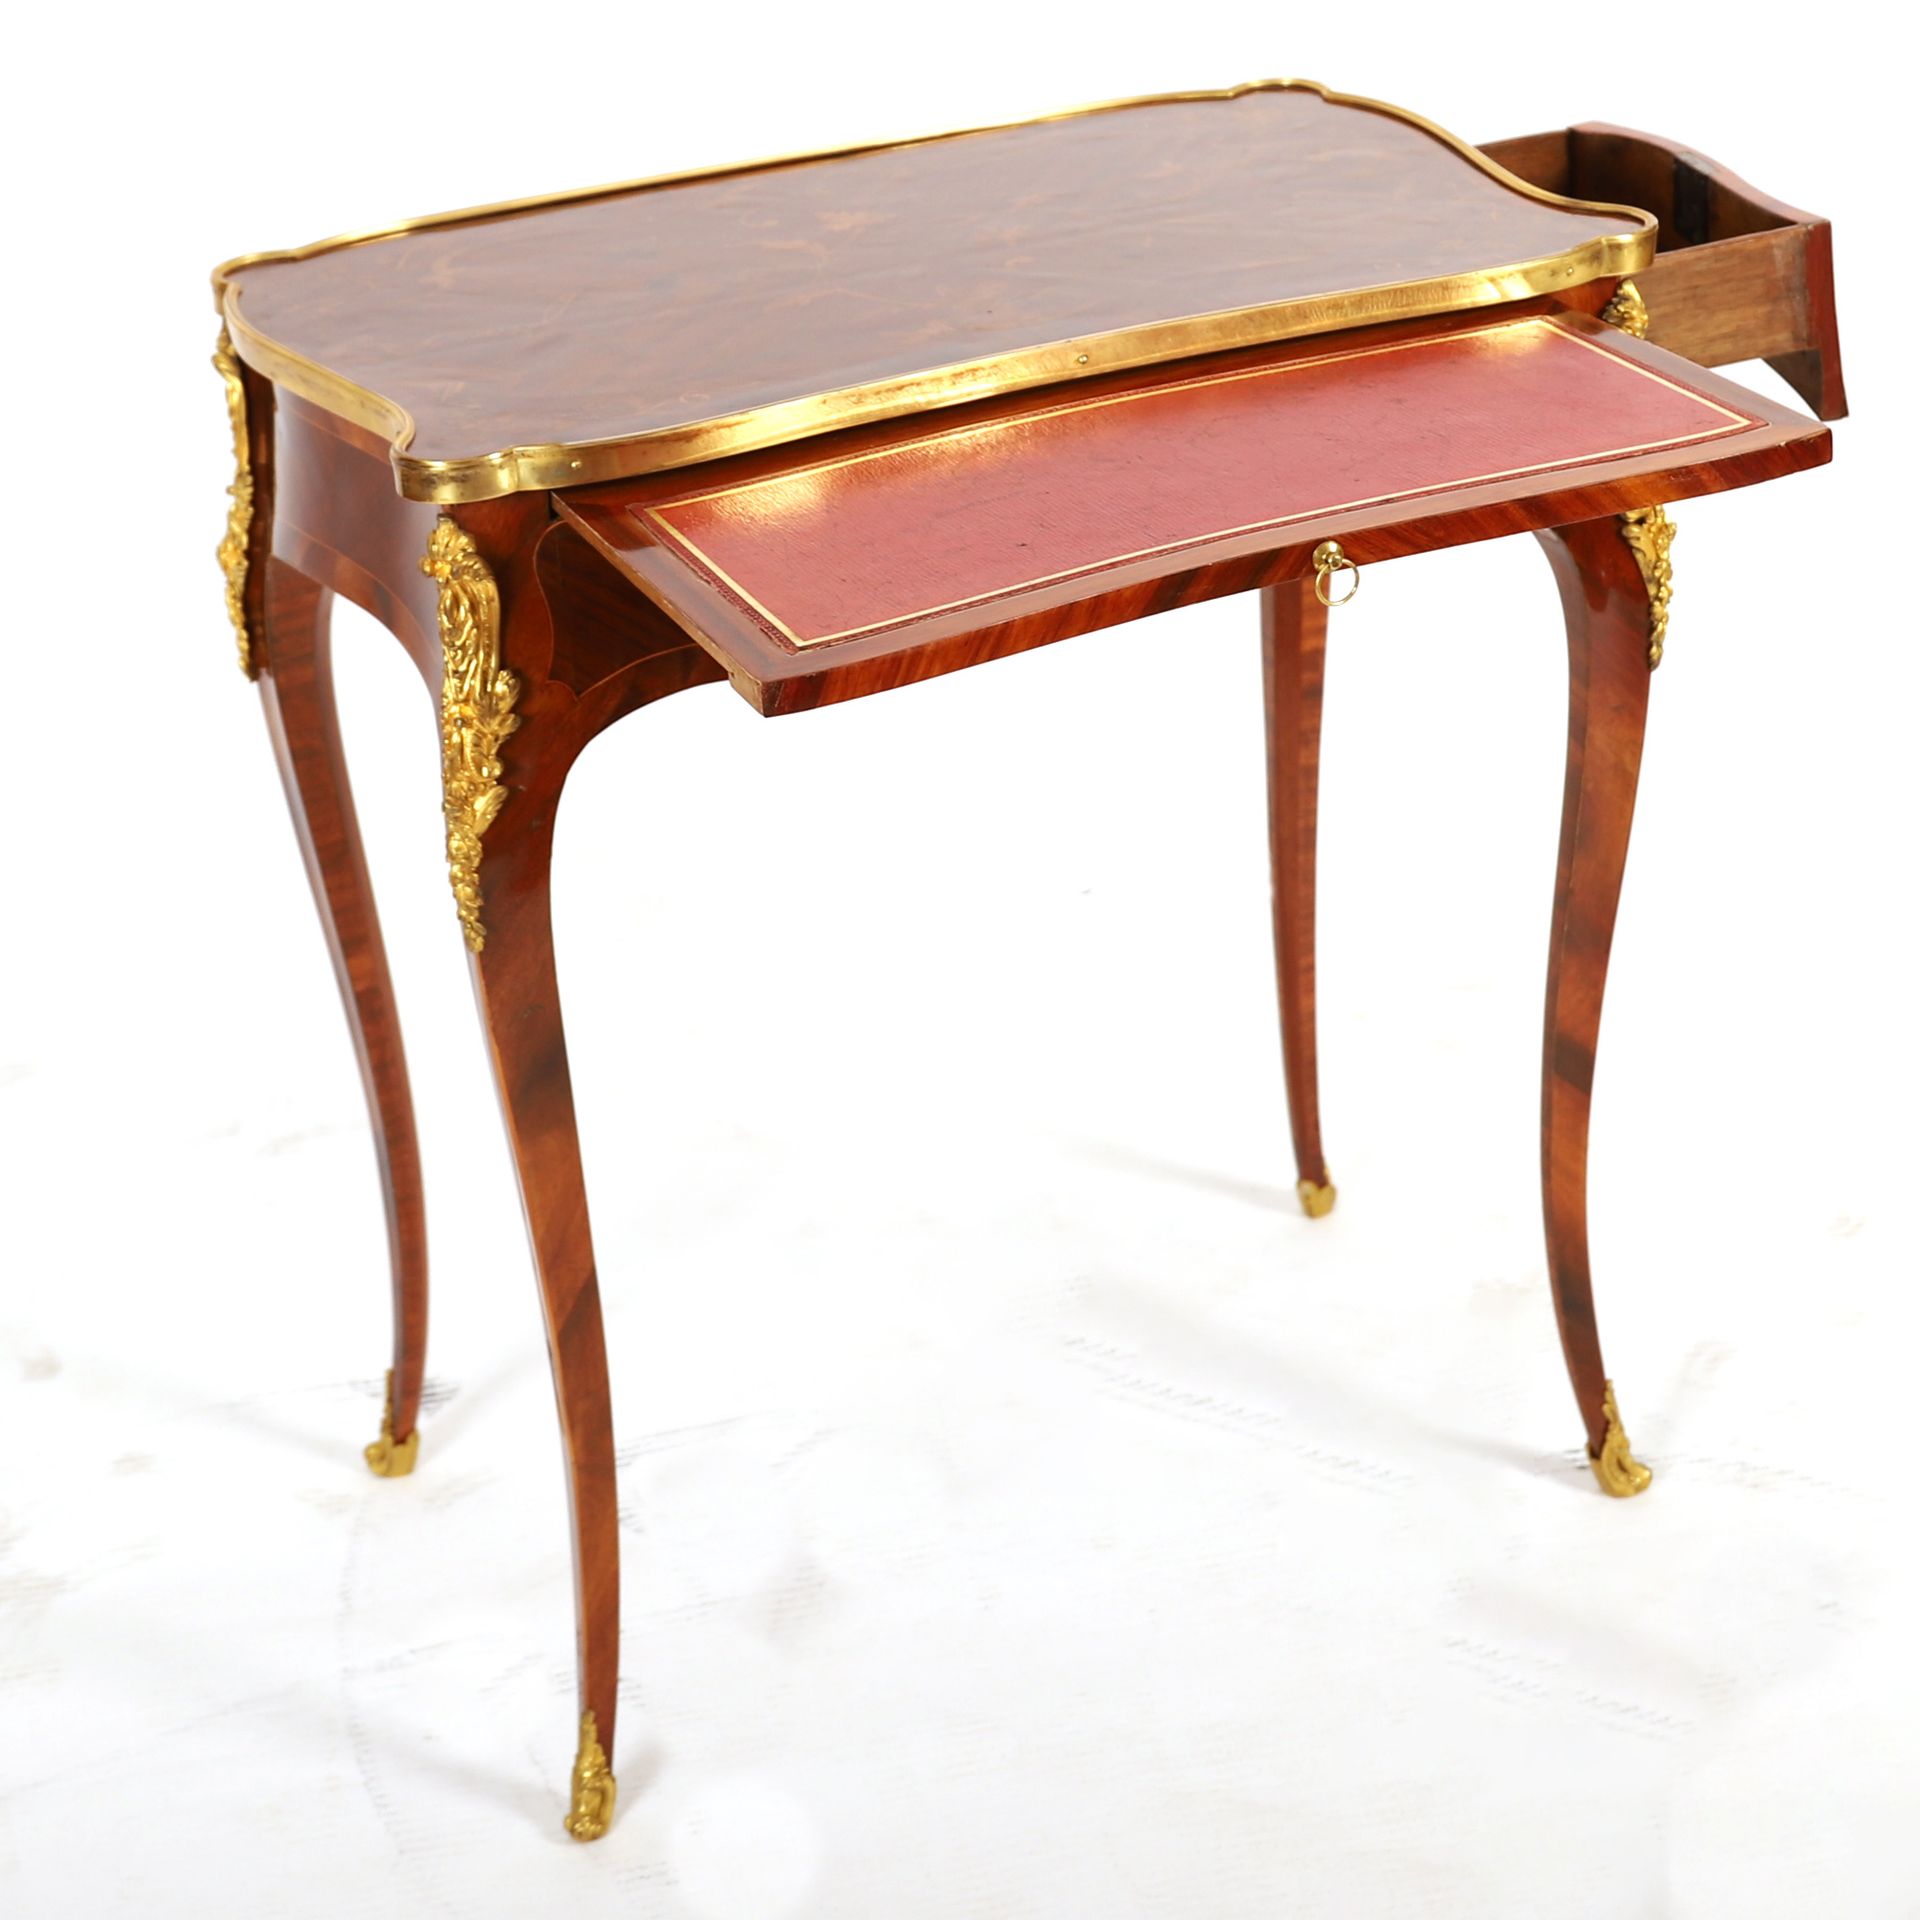 Null SMALL LOUIS XV PERIOD INLAID COFFEE TABLE

The tray composed of a wood marq&hellip;